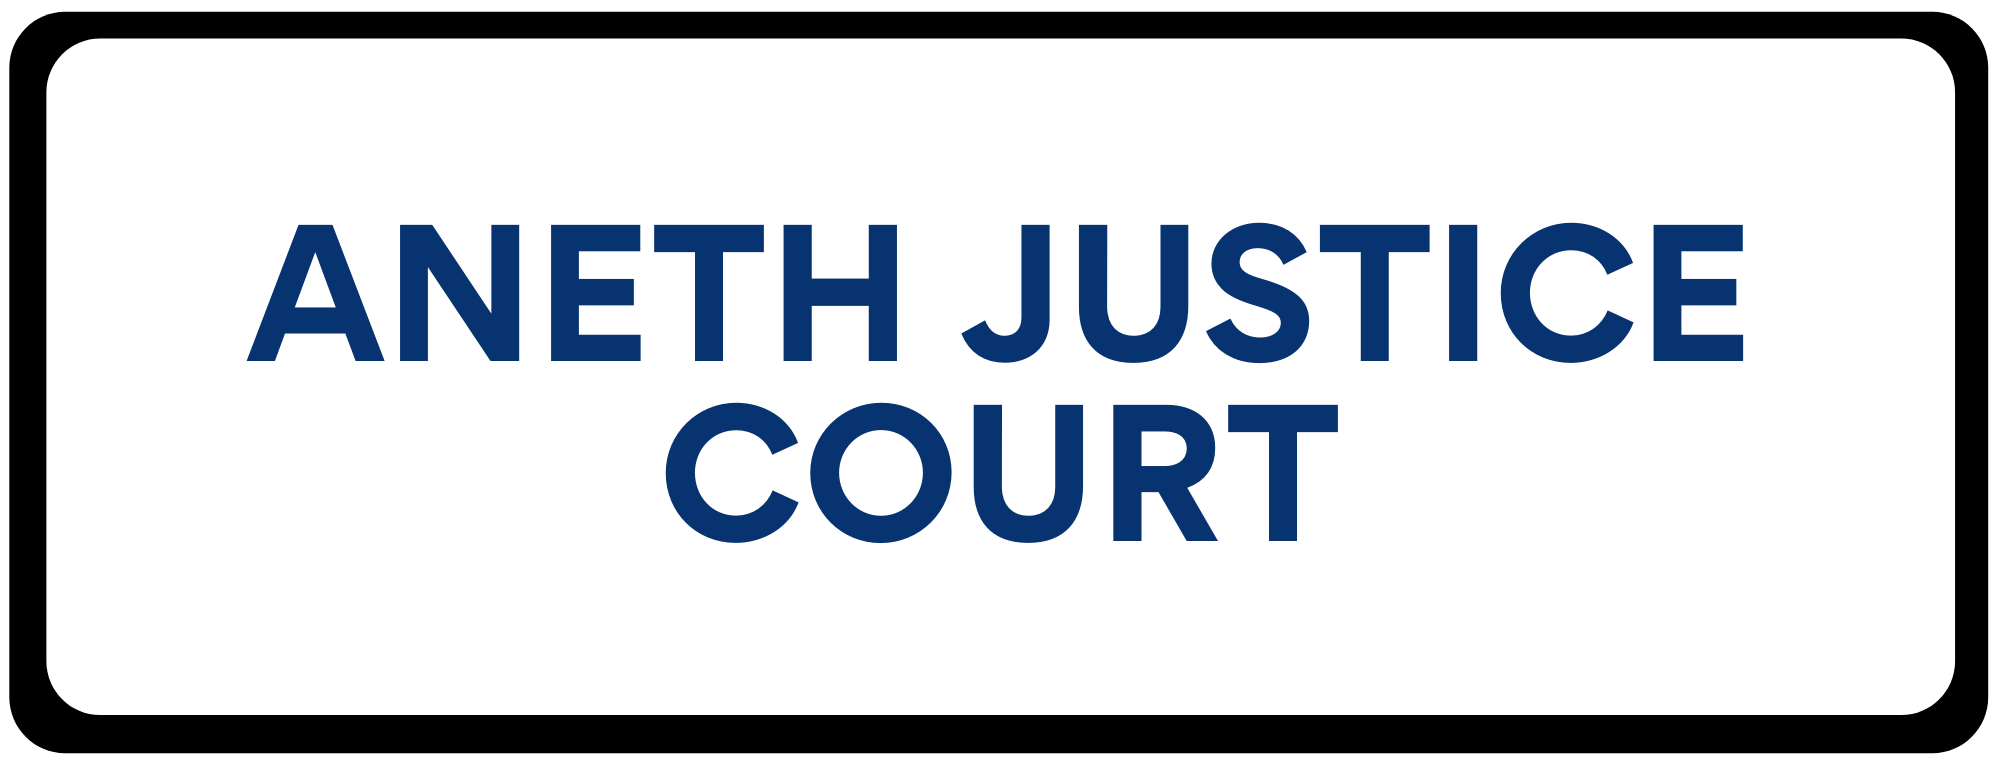 Aneth Justice Court